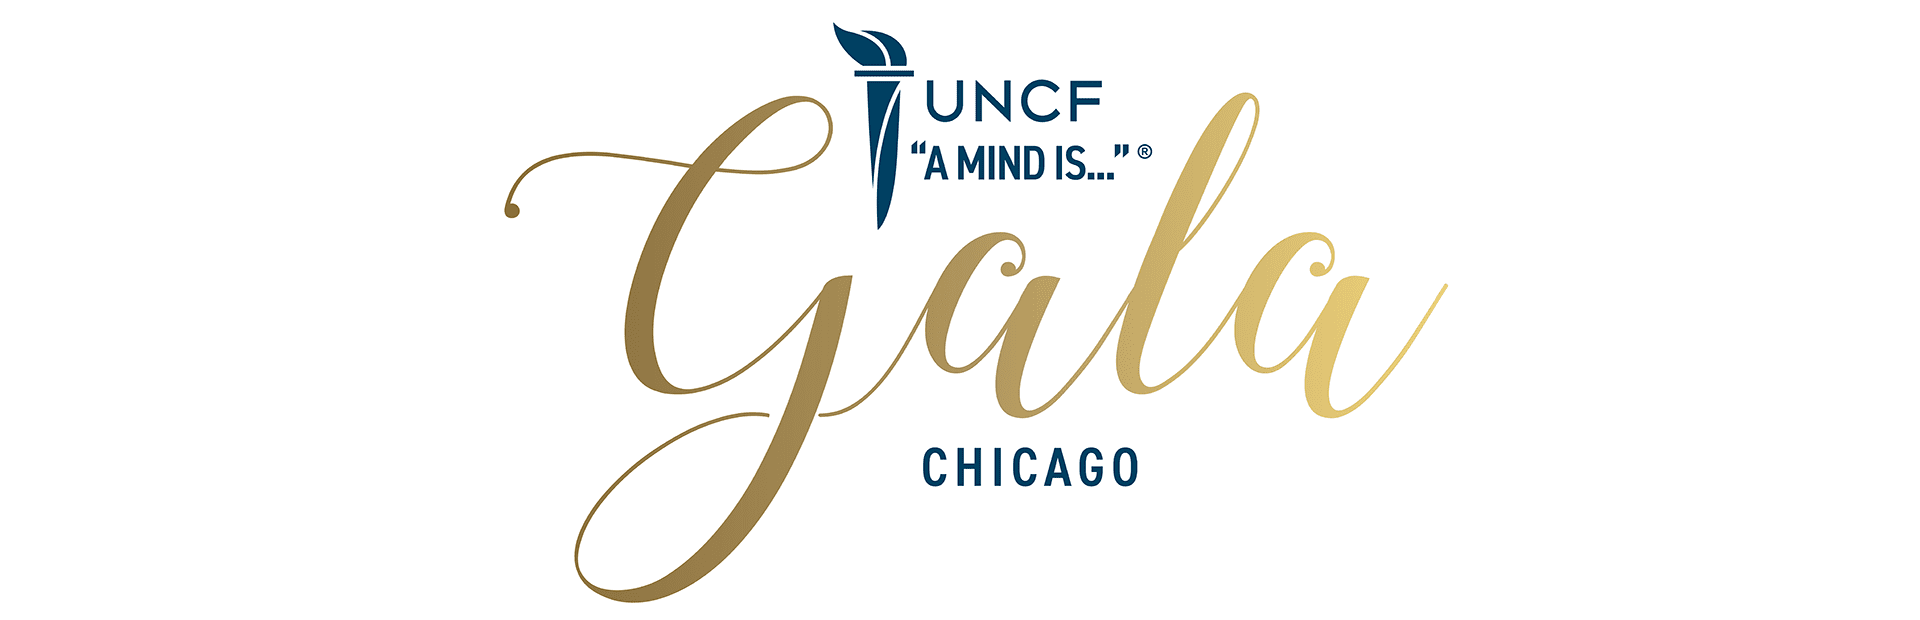 UNCF . A Mind Is Gala Chicago